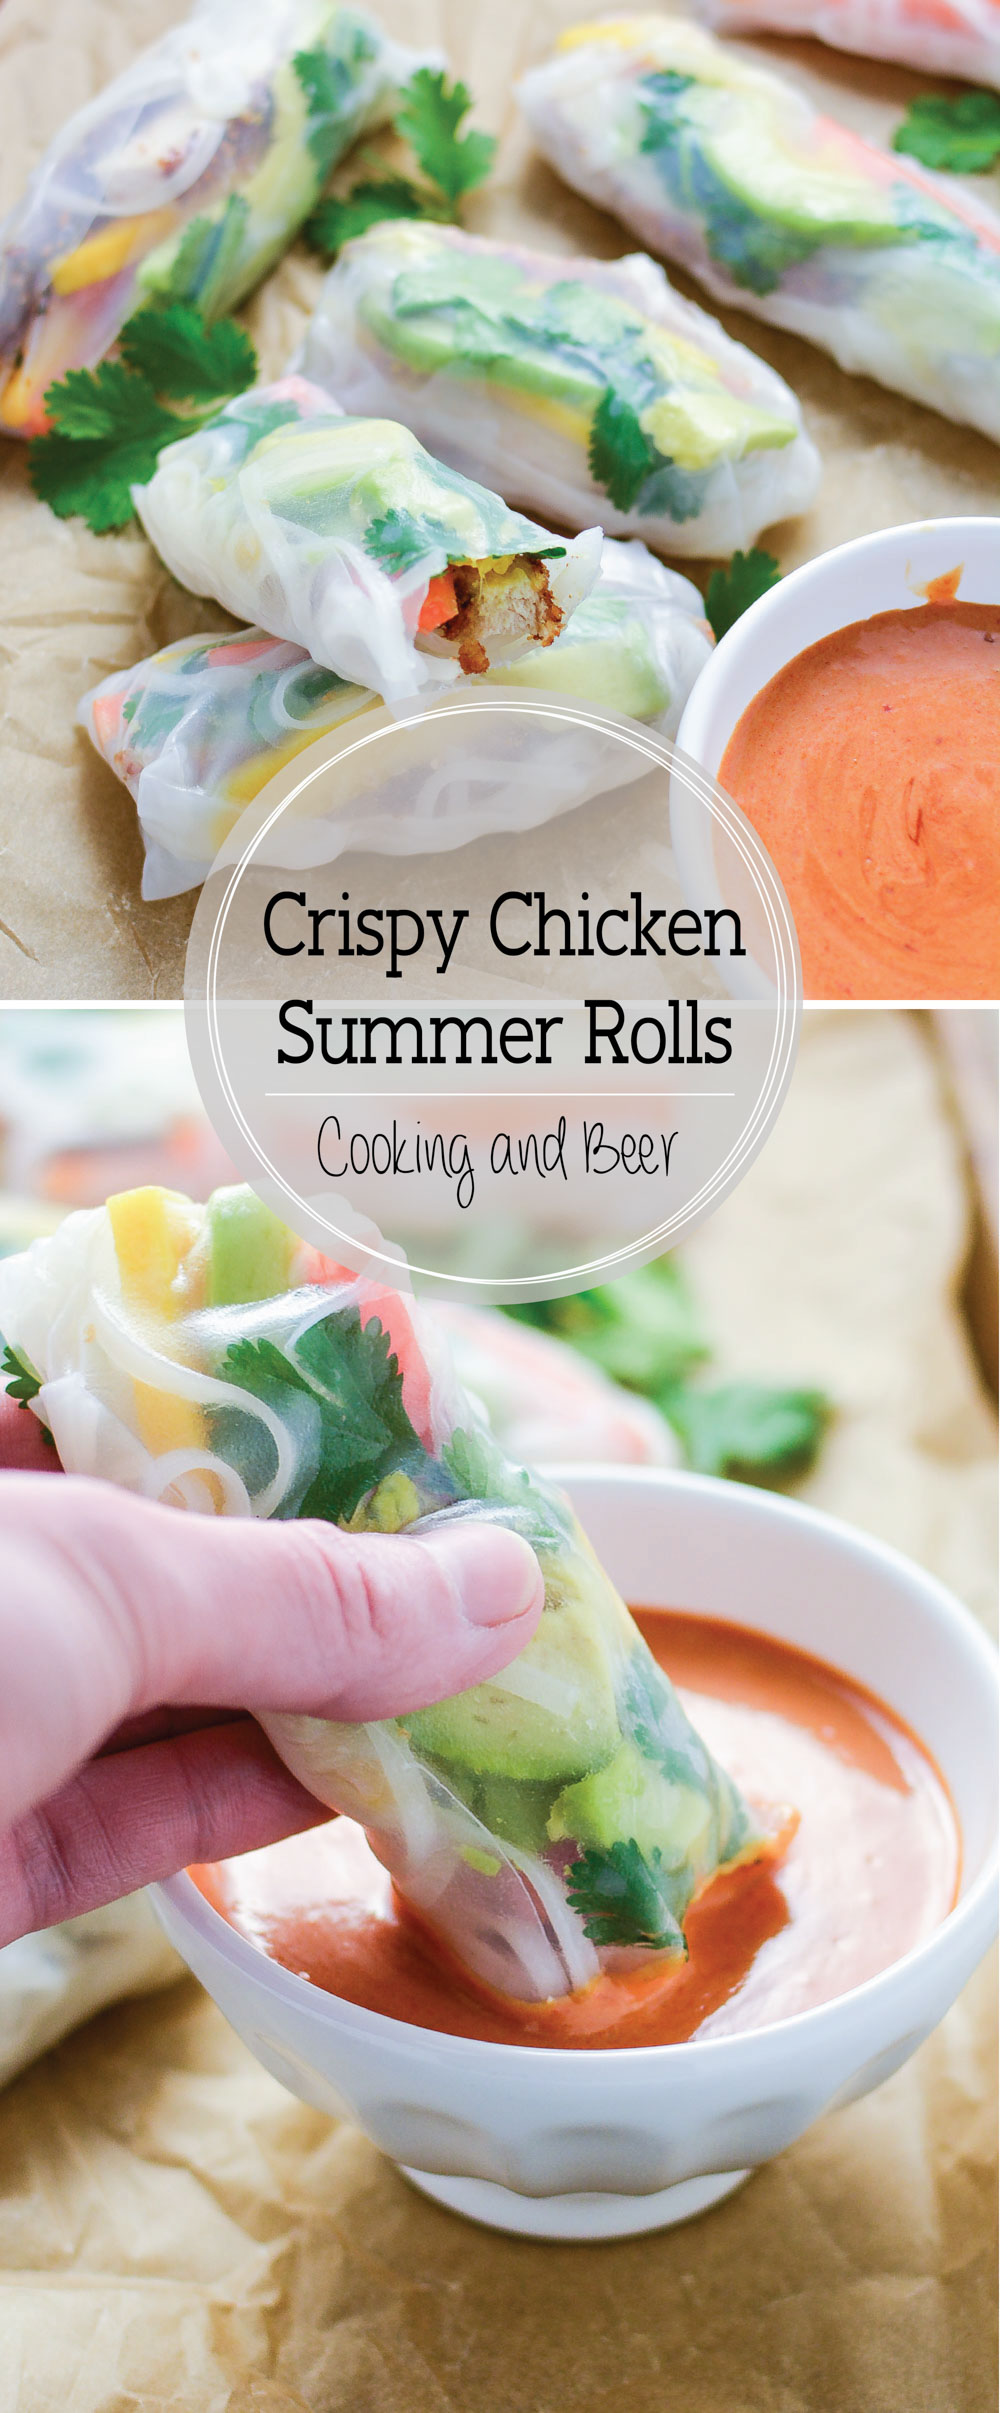 Tropical Crispy Chicken Summer Rolls are a bright and cheerful spring or summer recipe!